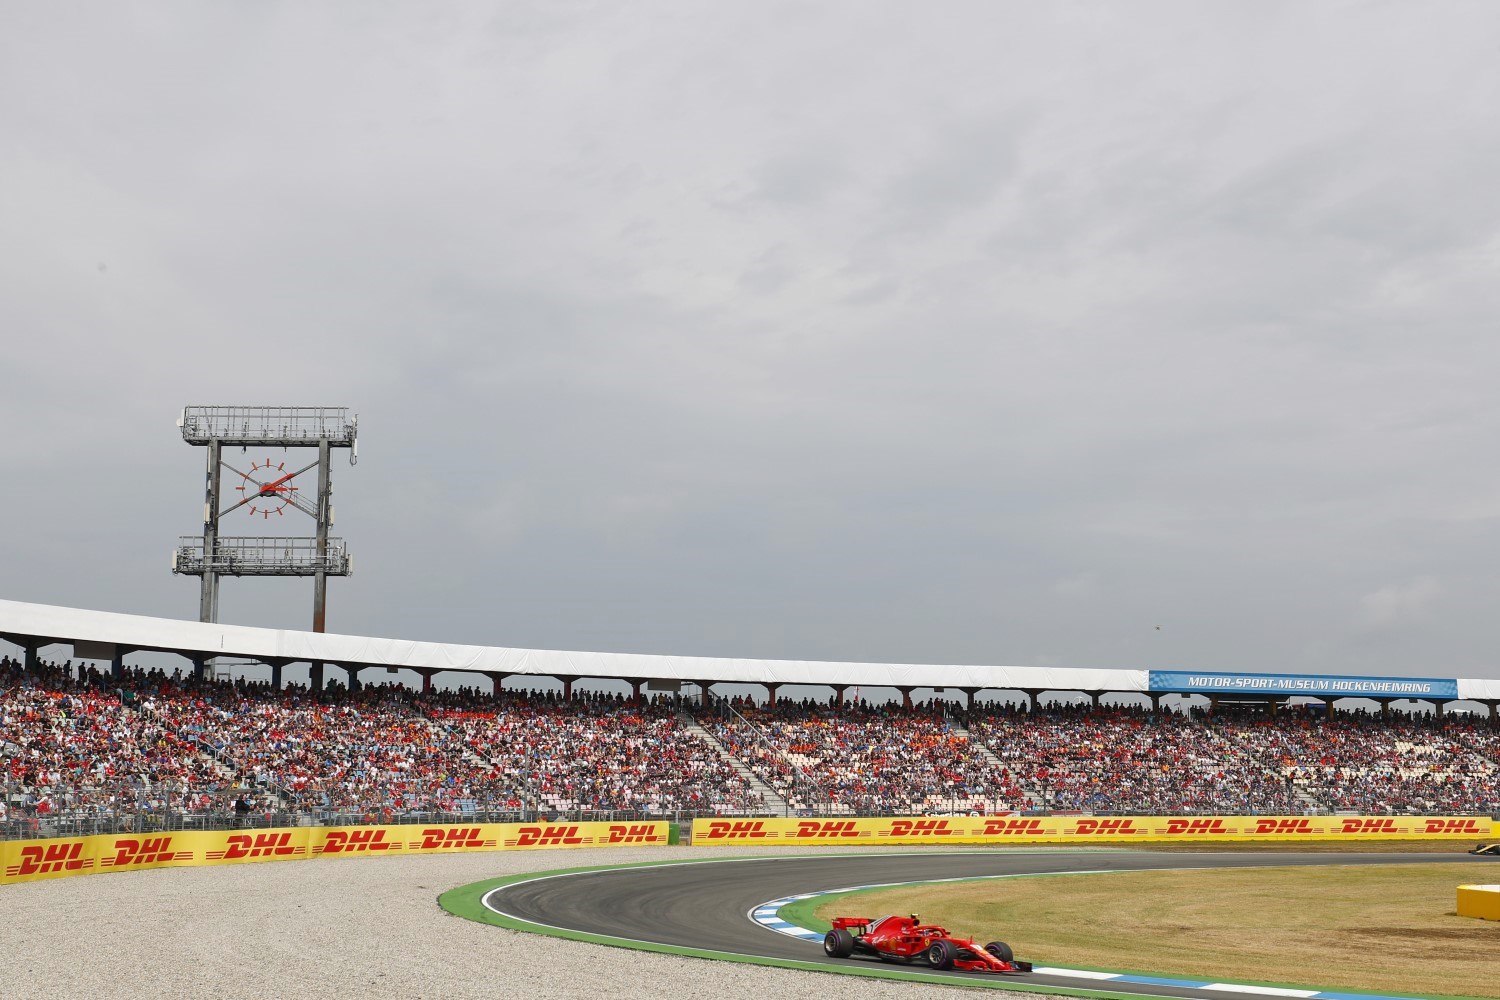 Vettel and Ferrari race ahead with a great power unit